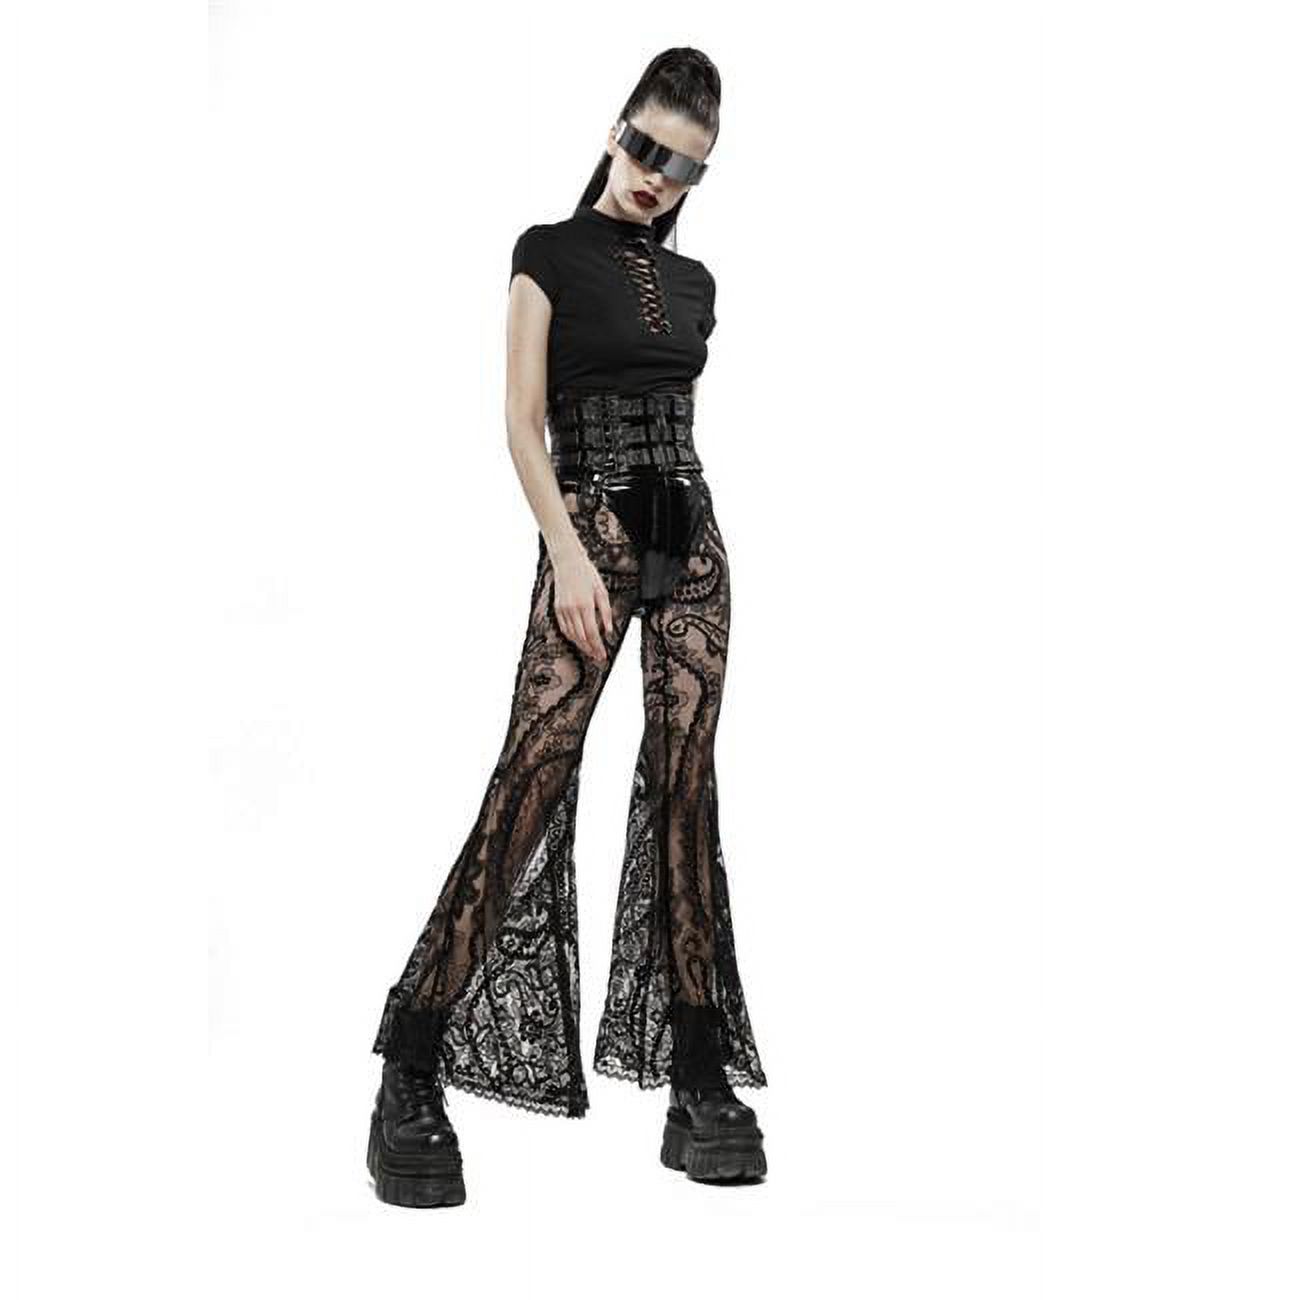 Western Fashion WK397-XL Gothic Paisley Pattern Lace Transparent Trousers&#44; Black - Extra Large - image 1 of 1